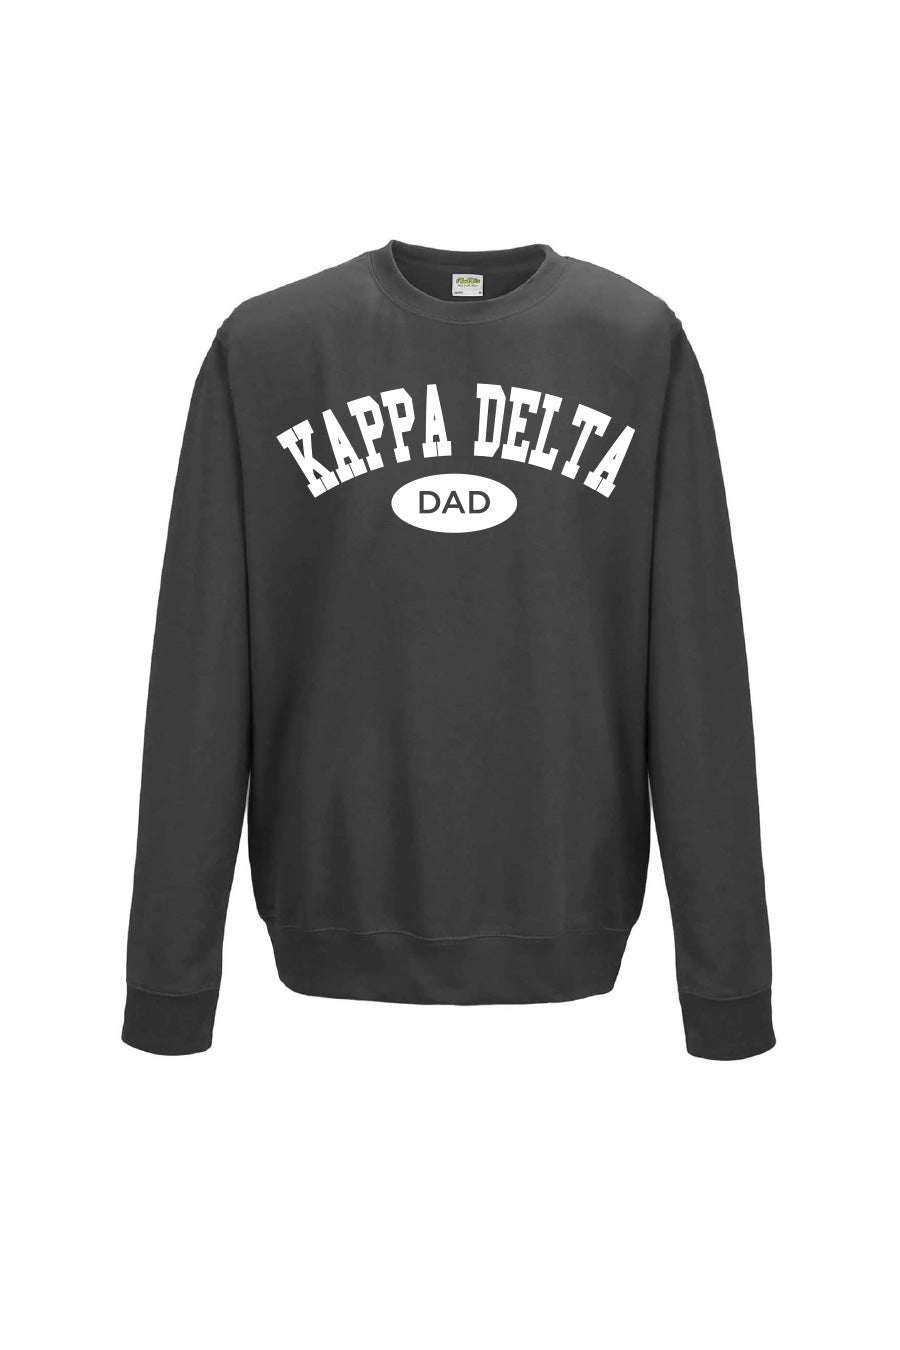 Load image into Gallery viewer, Kaitlyn Kappa Delta Dad Crew
